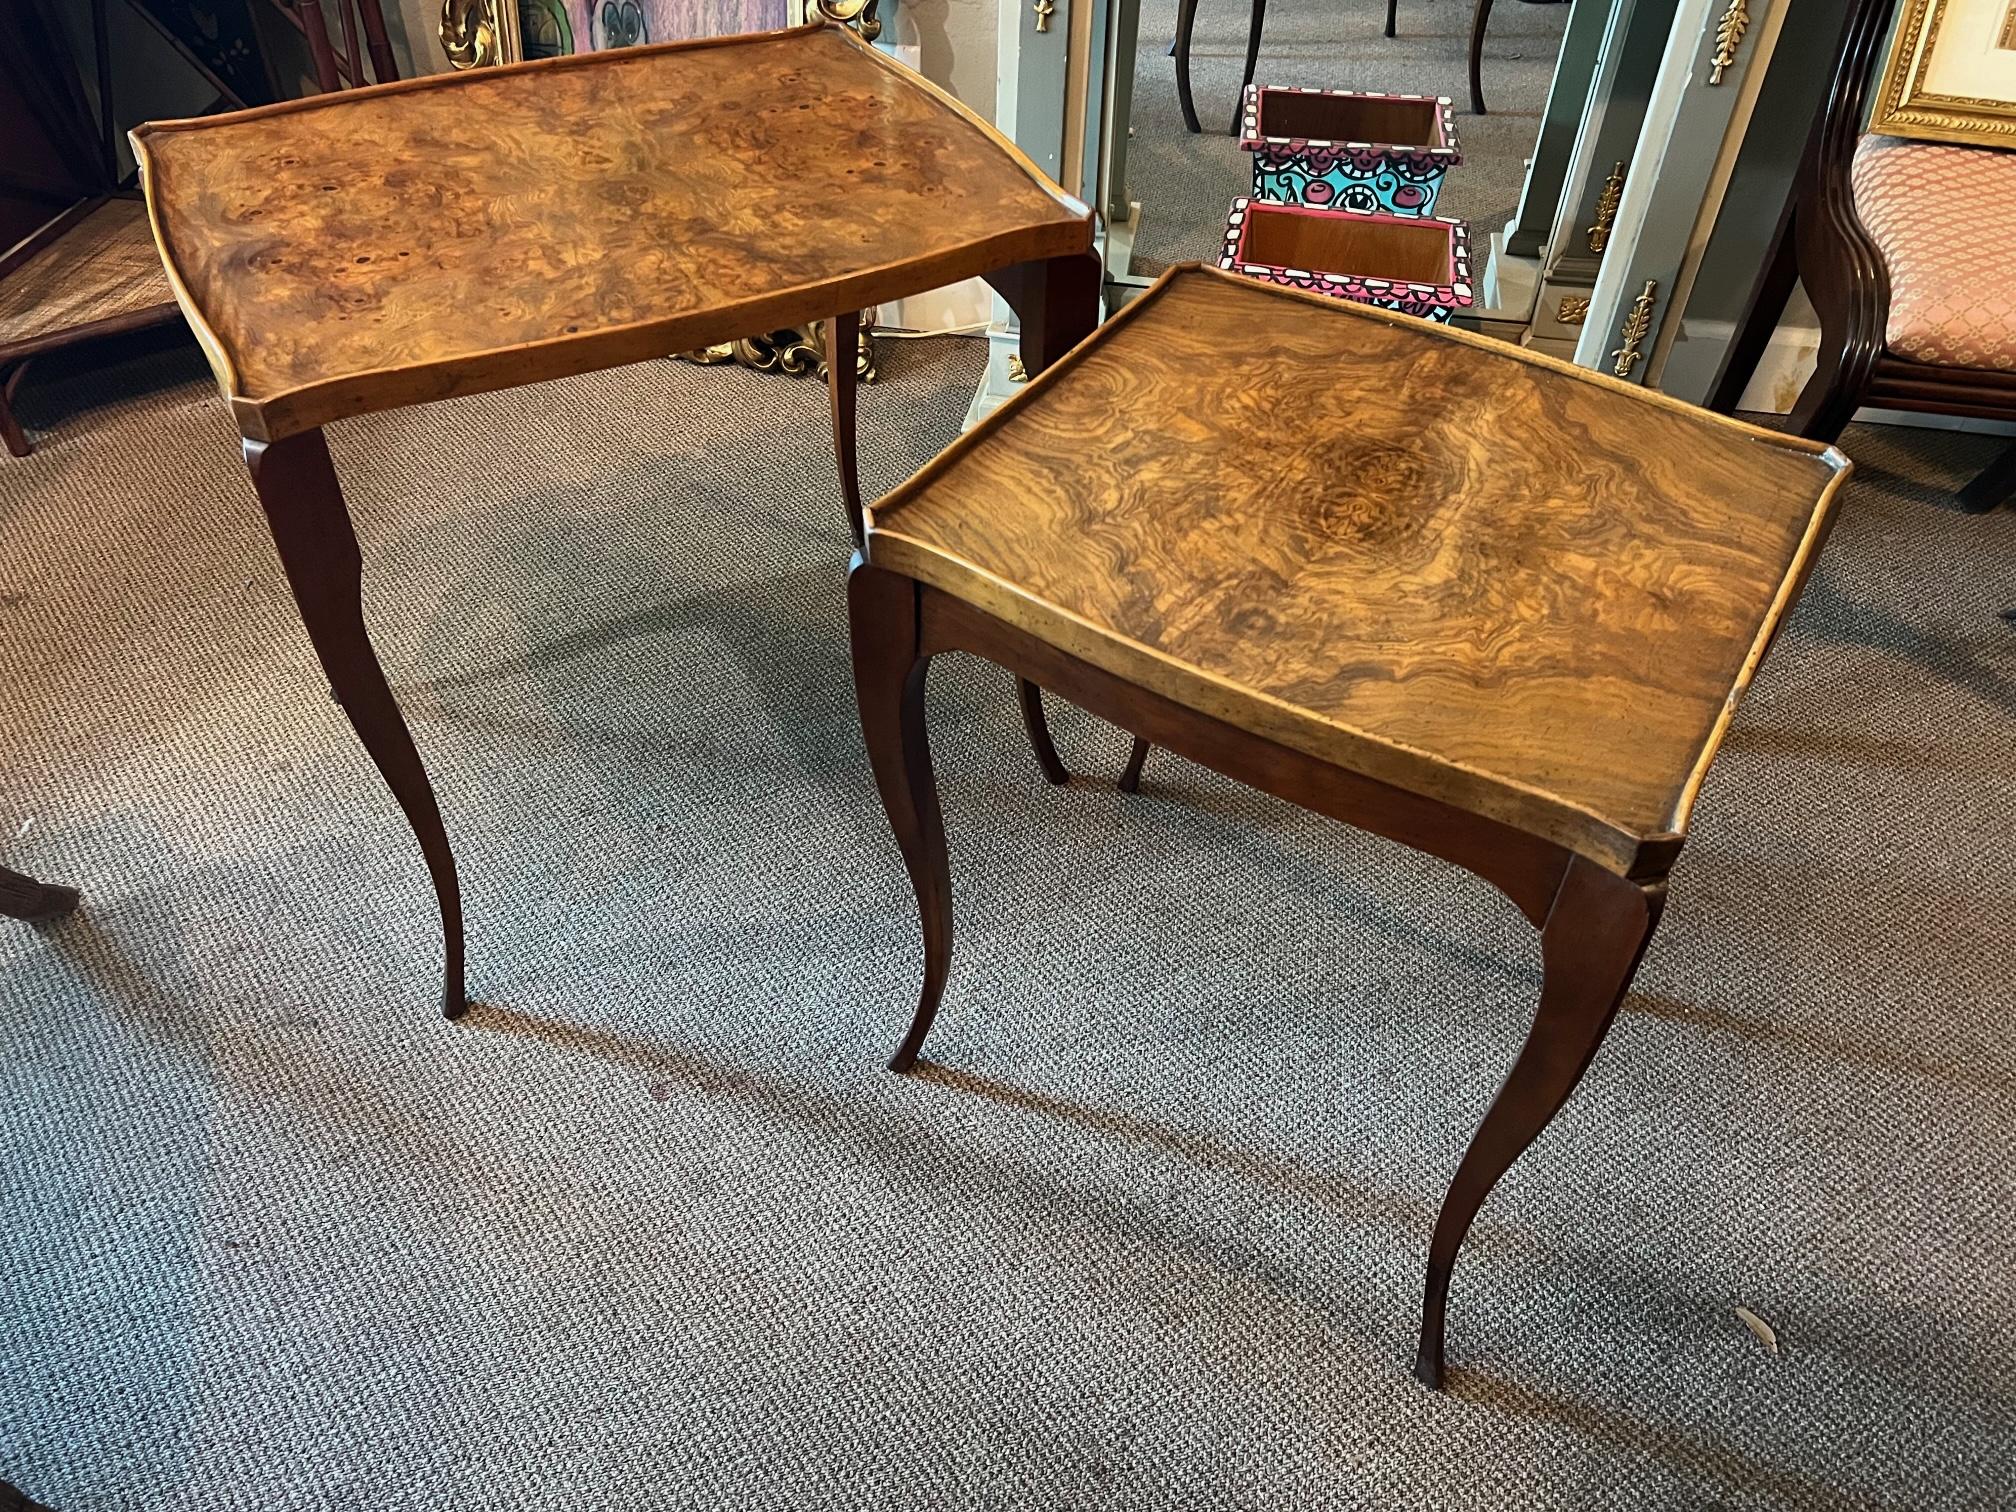 Two elegant nesting tables by Baker Furniture, ca' 1960's. Beautiful bookmatched, elmwood tops with raised edge. Cabriolet legs with original speckled finish.